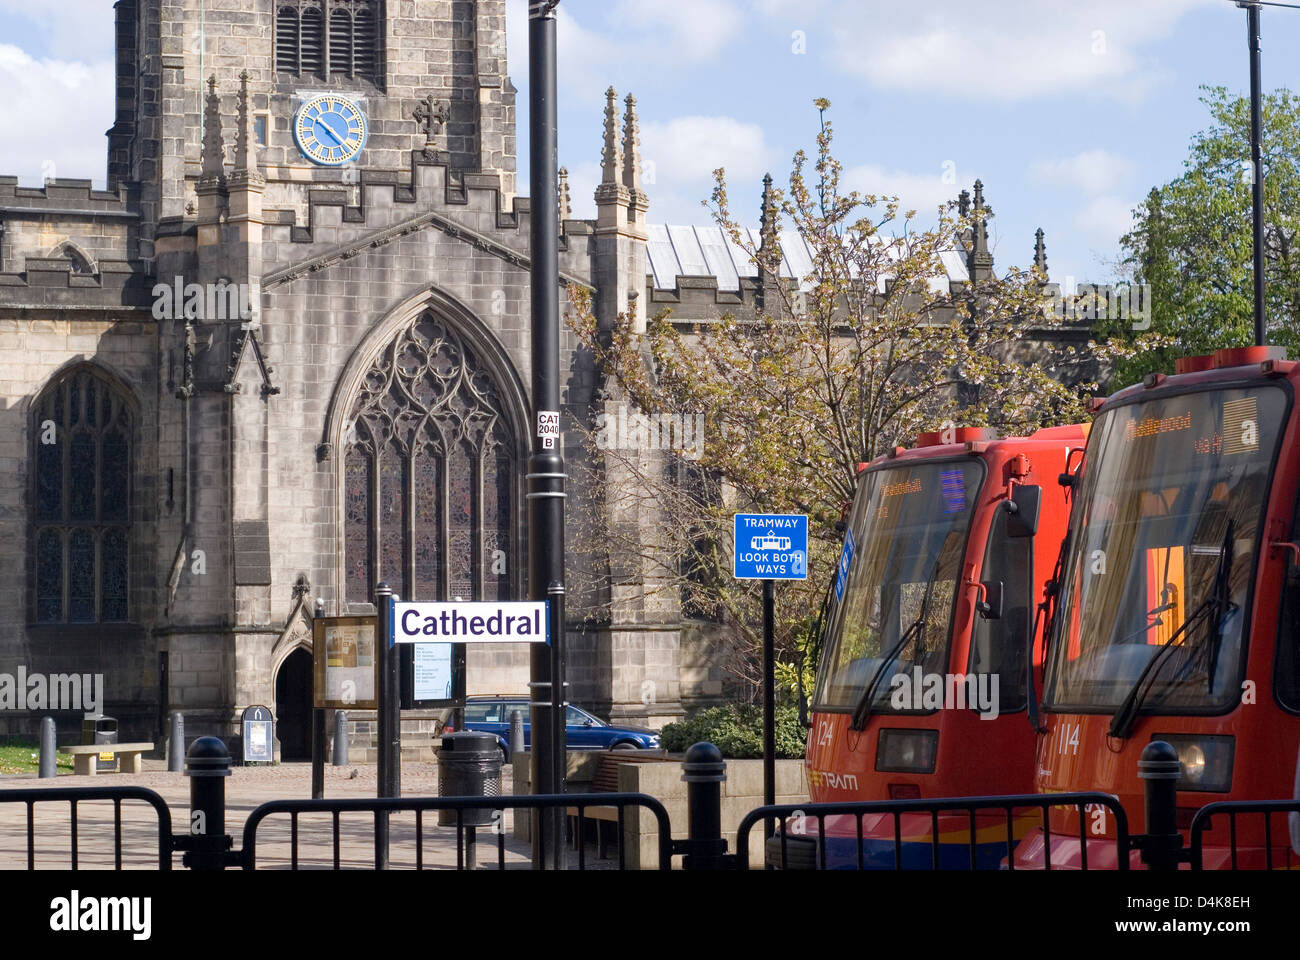 Two trams stopped outside Sheffield Cathedral, Cathedral tram stop, Sheffield, UK Stock Photo